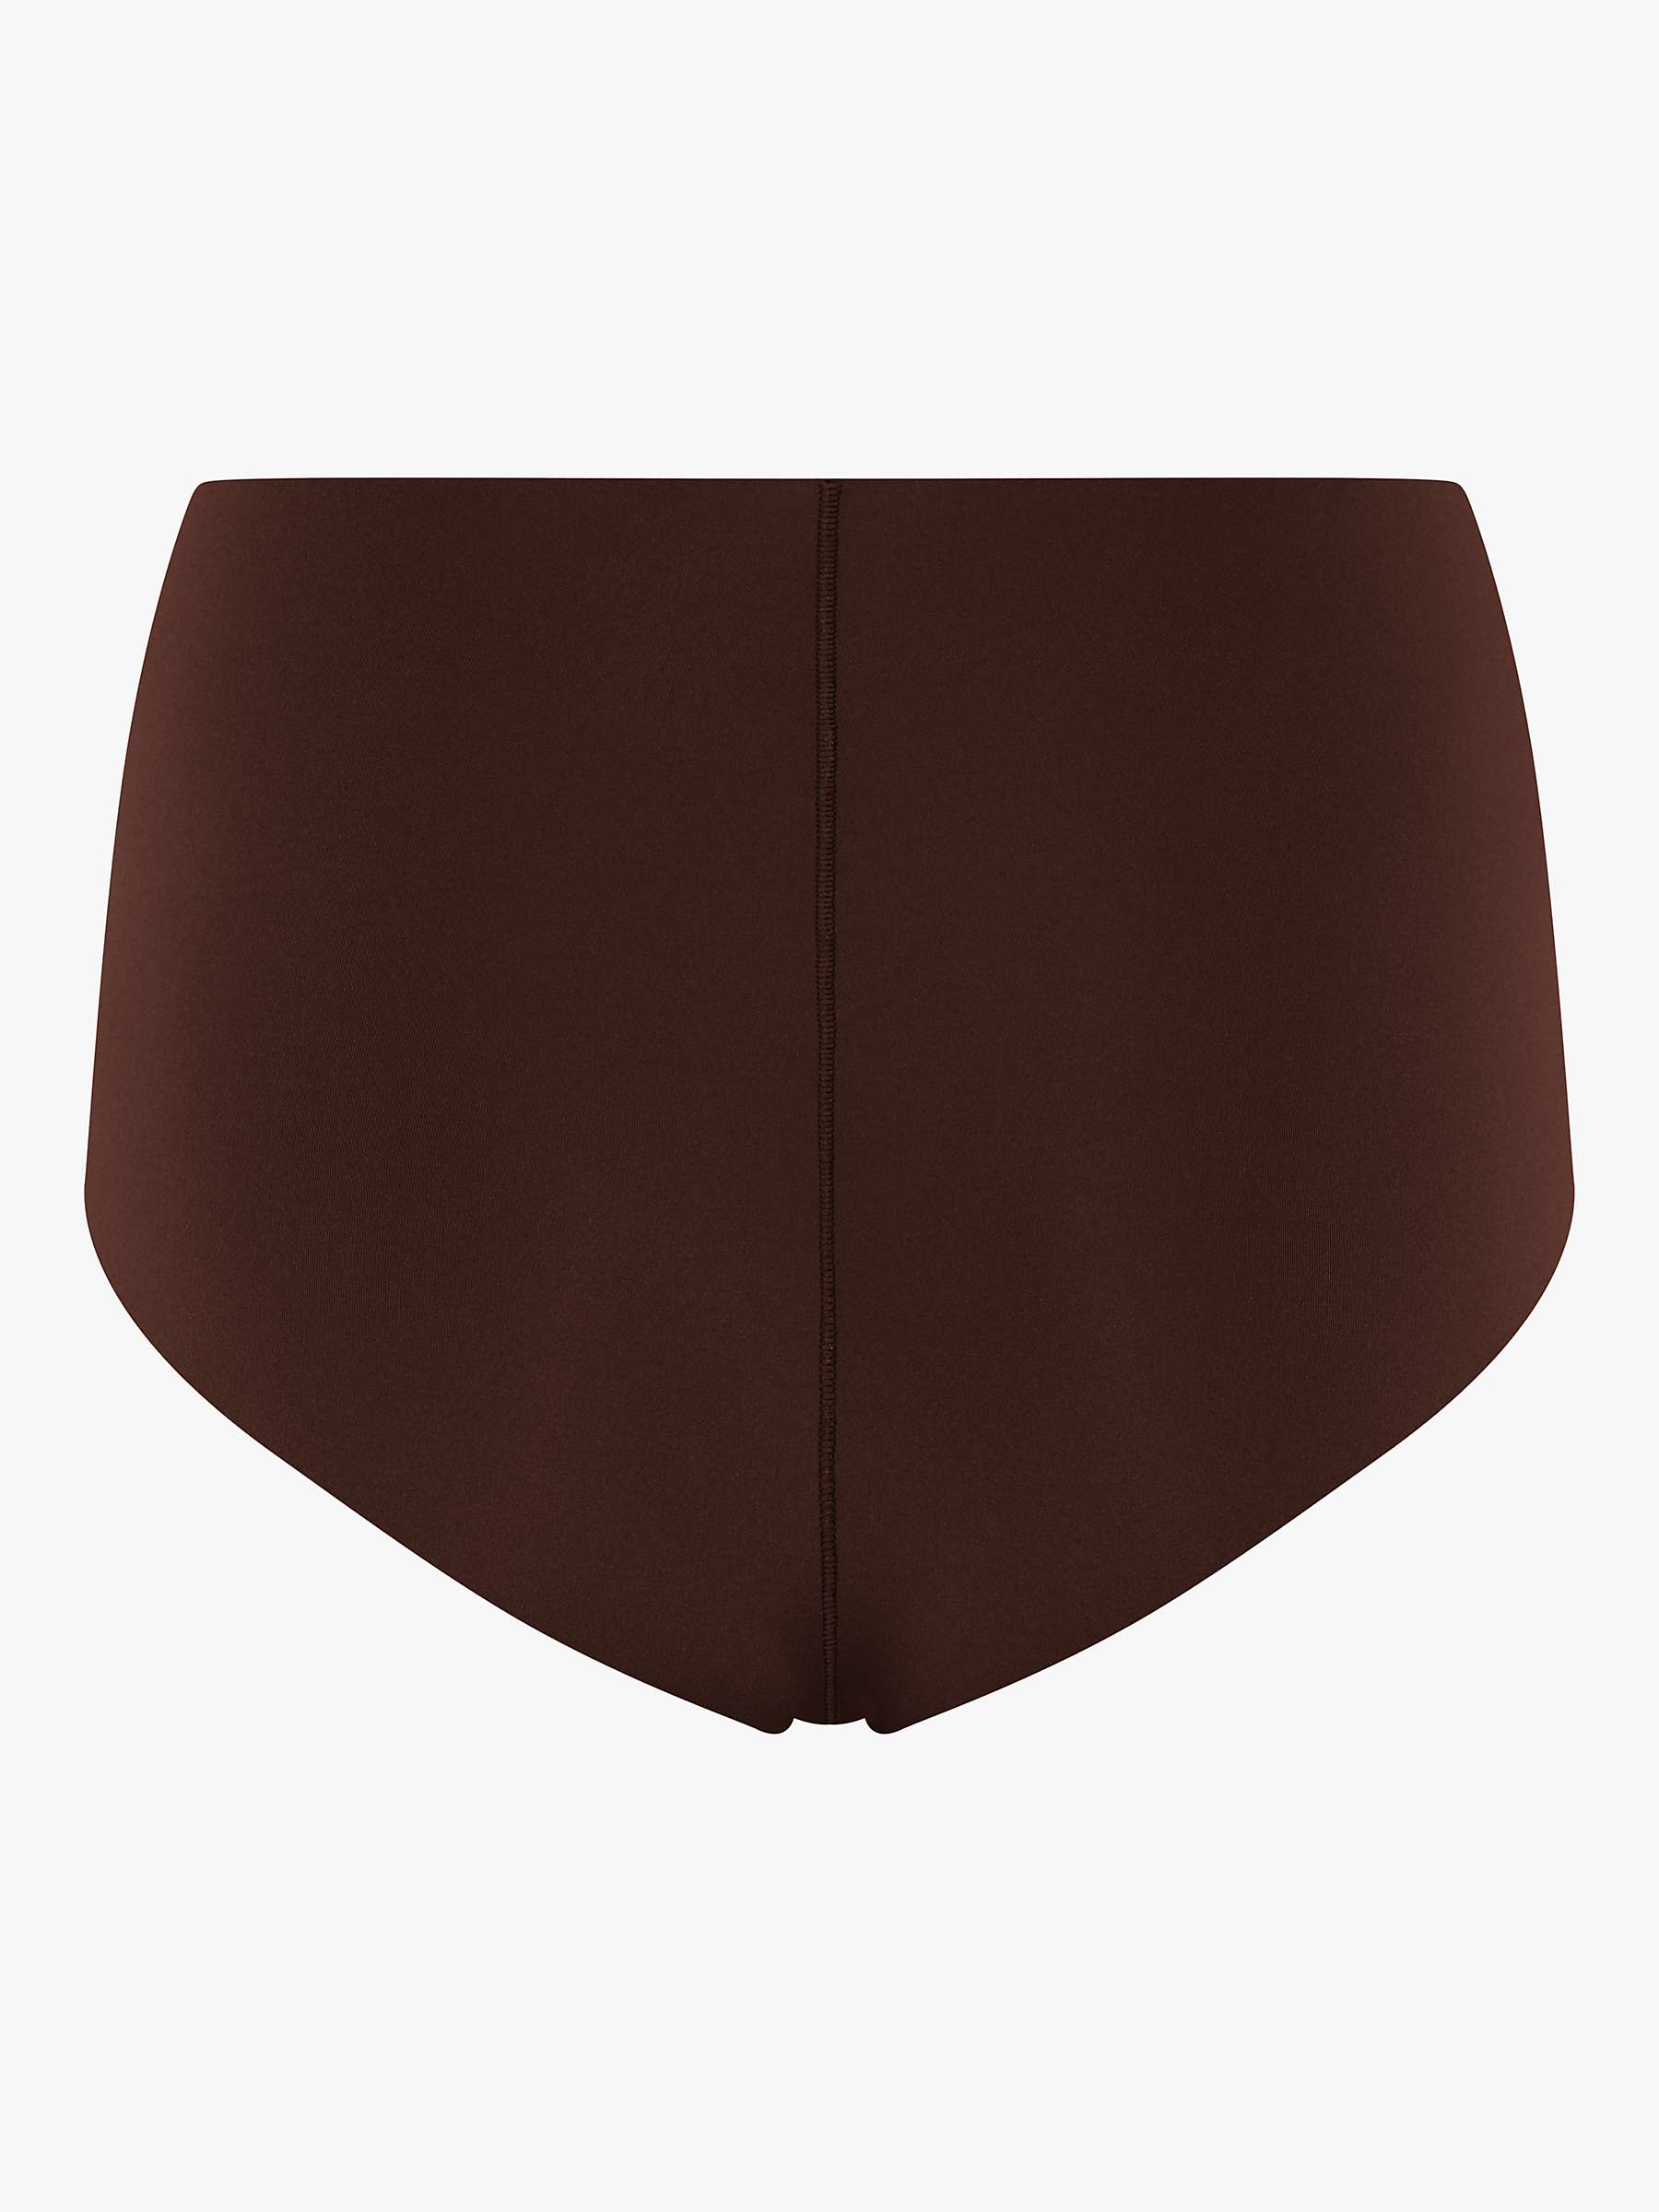 Buy Girlfriend Collective High Rise Plain Sports Knickers Online at johnlewis.com